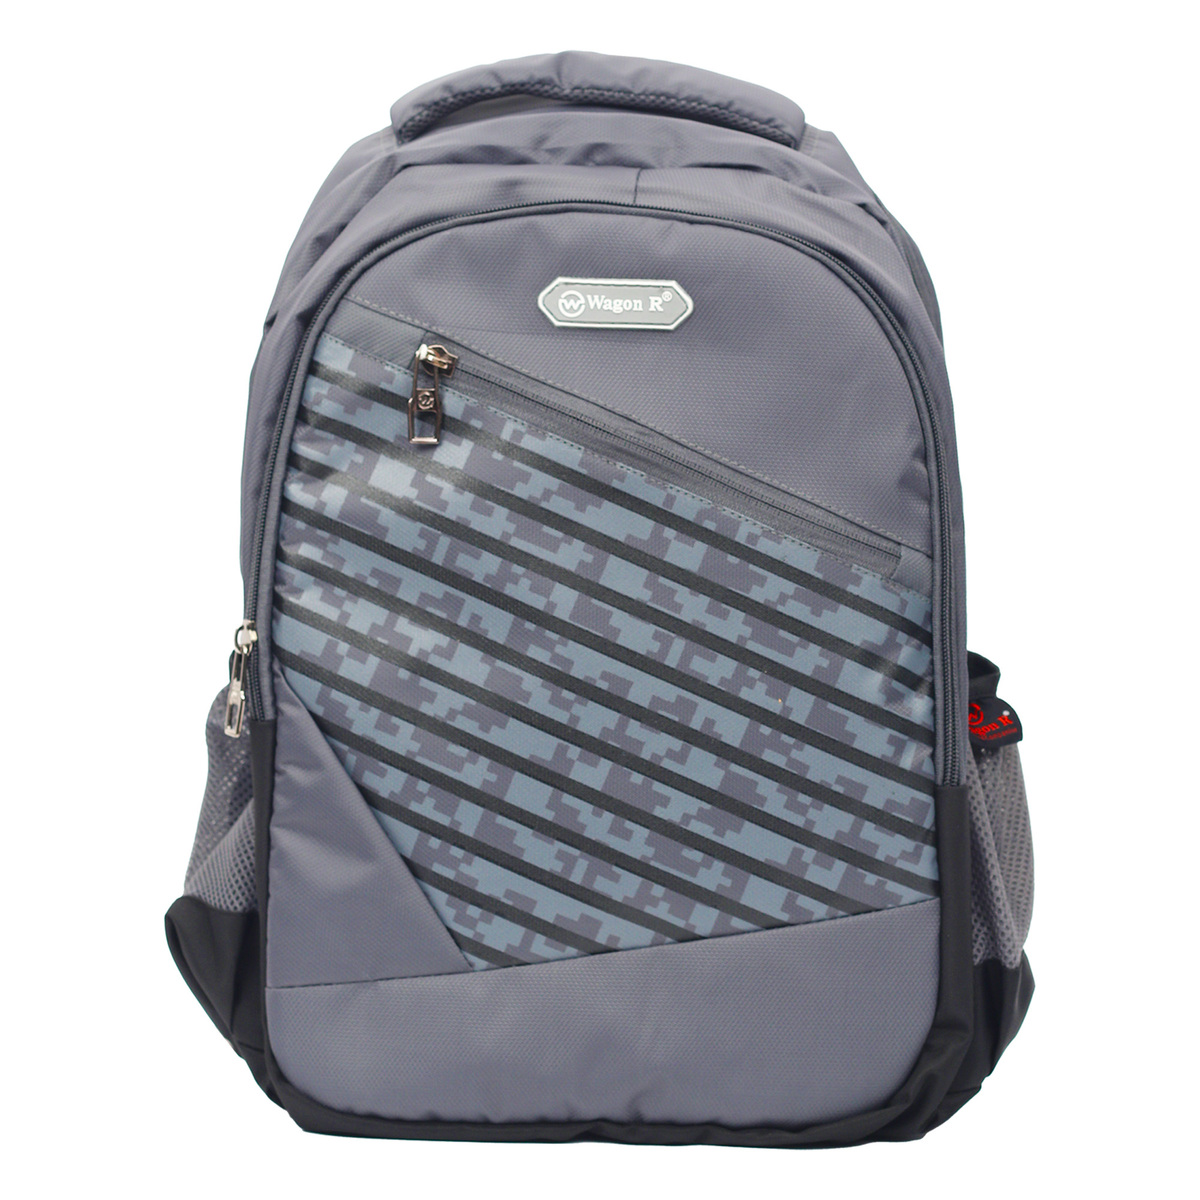 Wagon R Urban Backpack ZL27 19" Assorted Colors